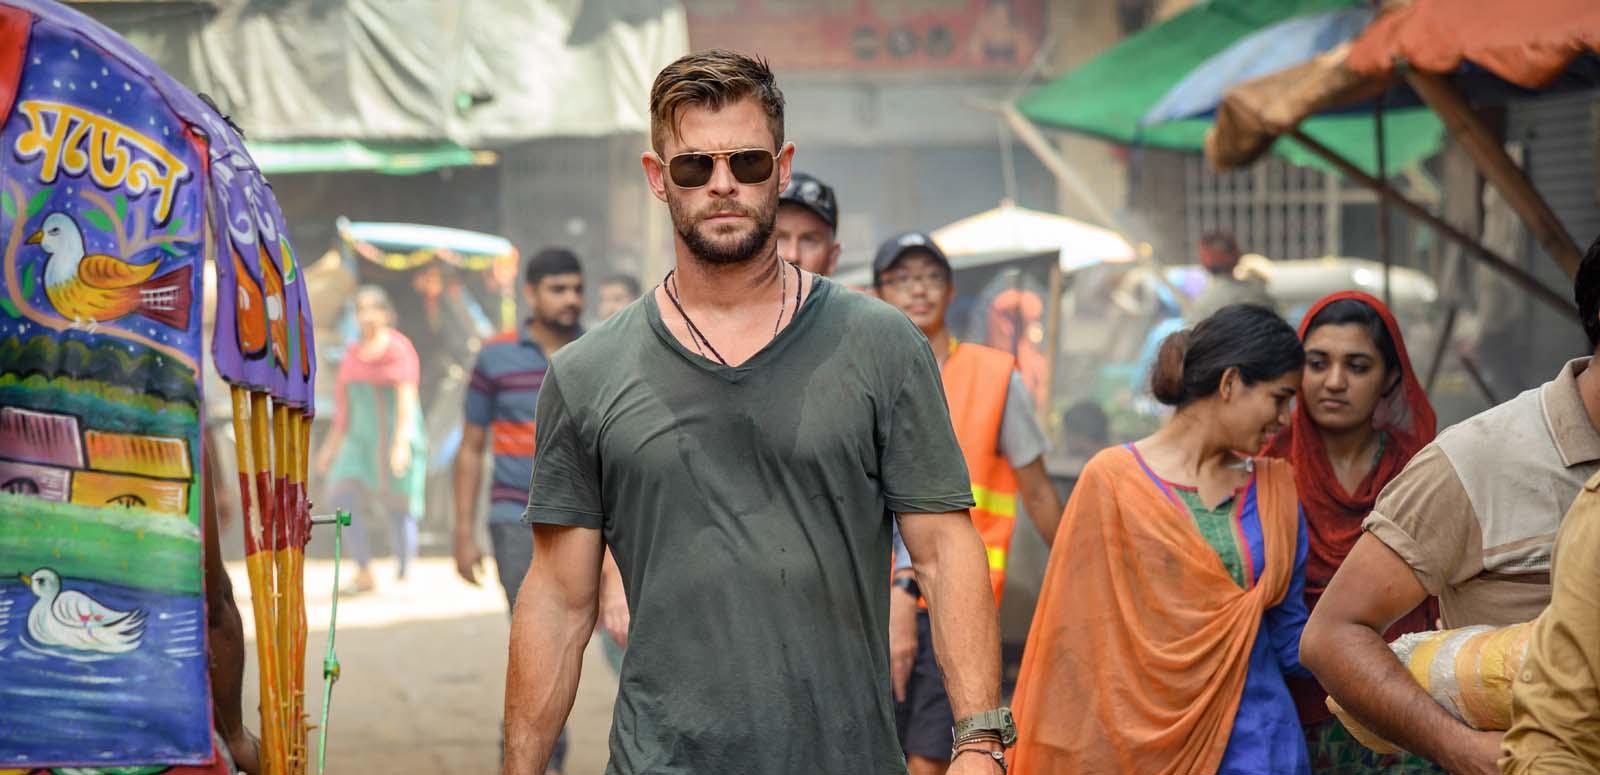 A caucasian assassin in t-shirt and sunglasses walks through a busy market in Bangladesh